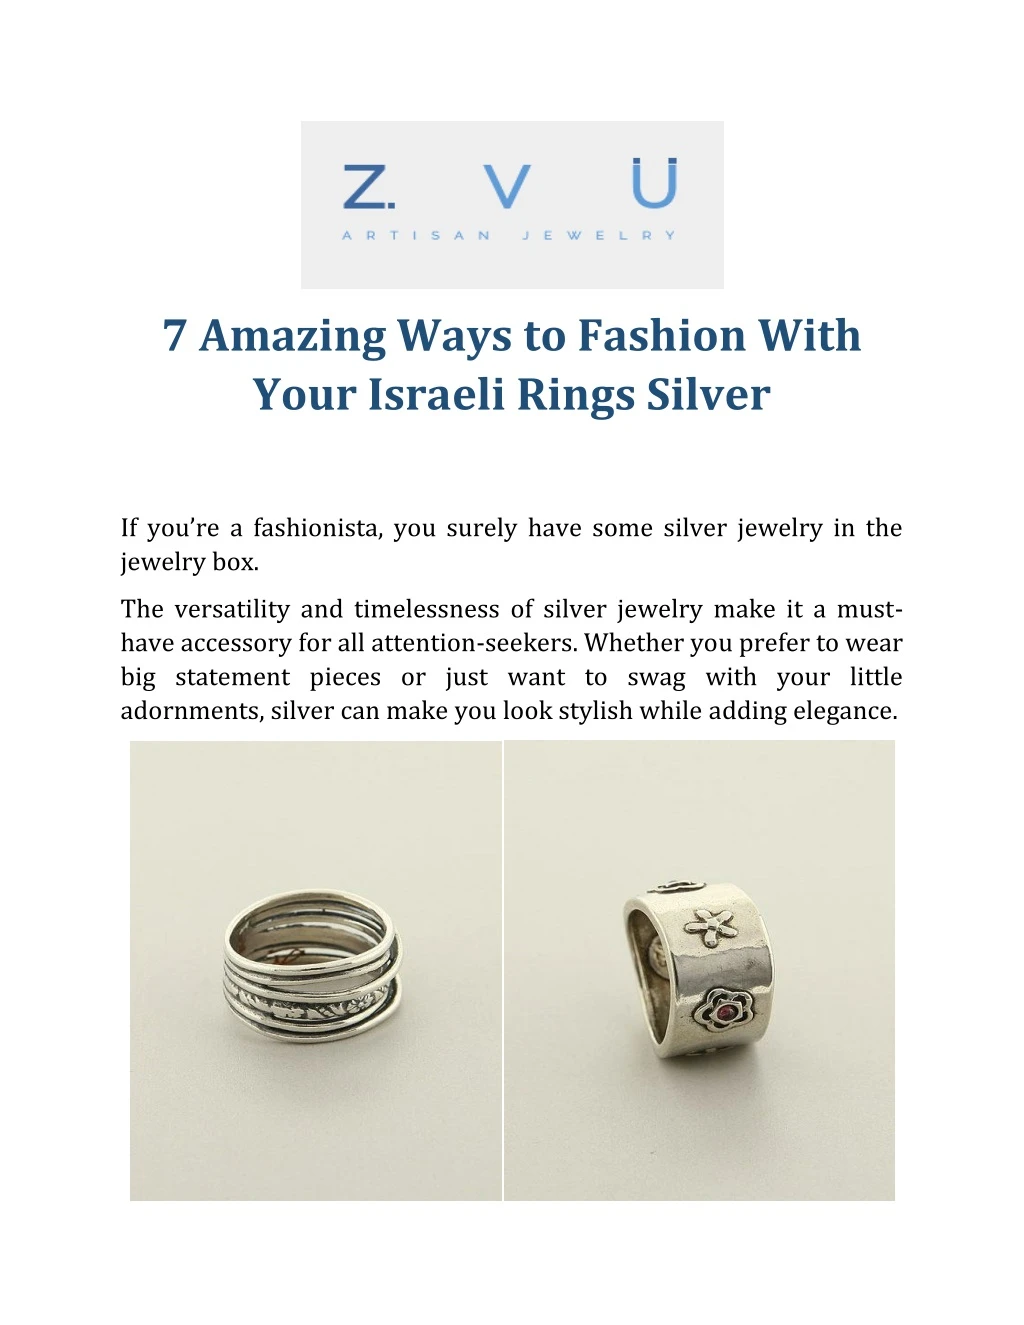 7 amazing ways to fashion with your israeli rings